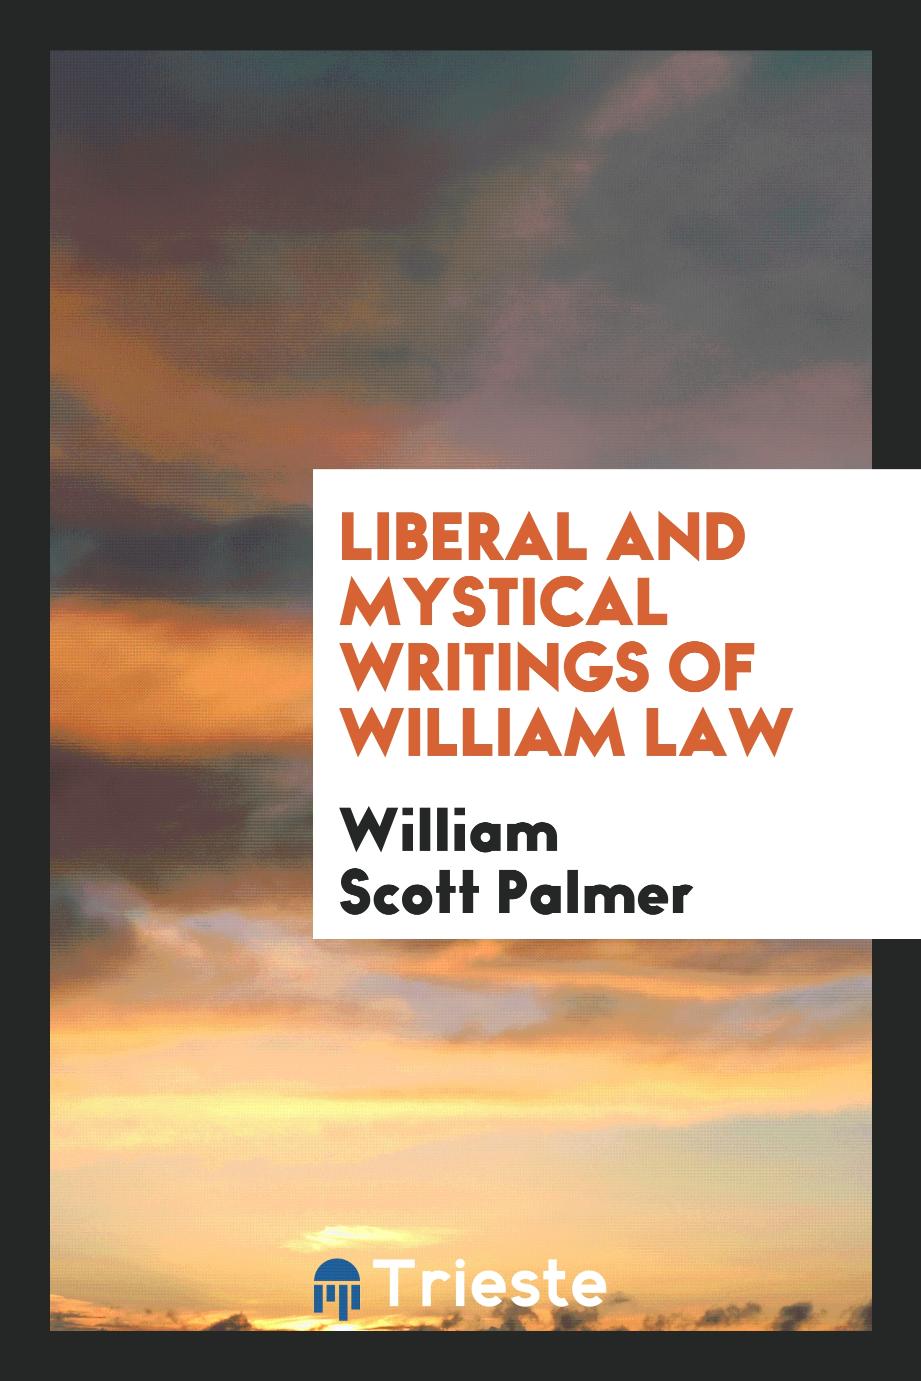 Liberal and mystical writings of William Law